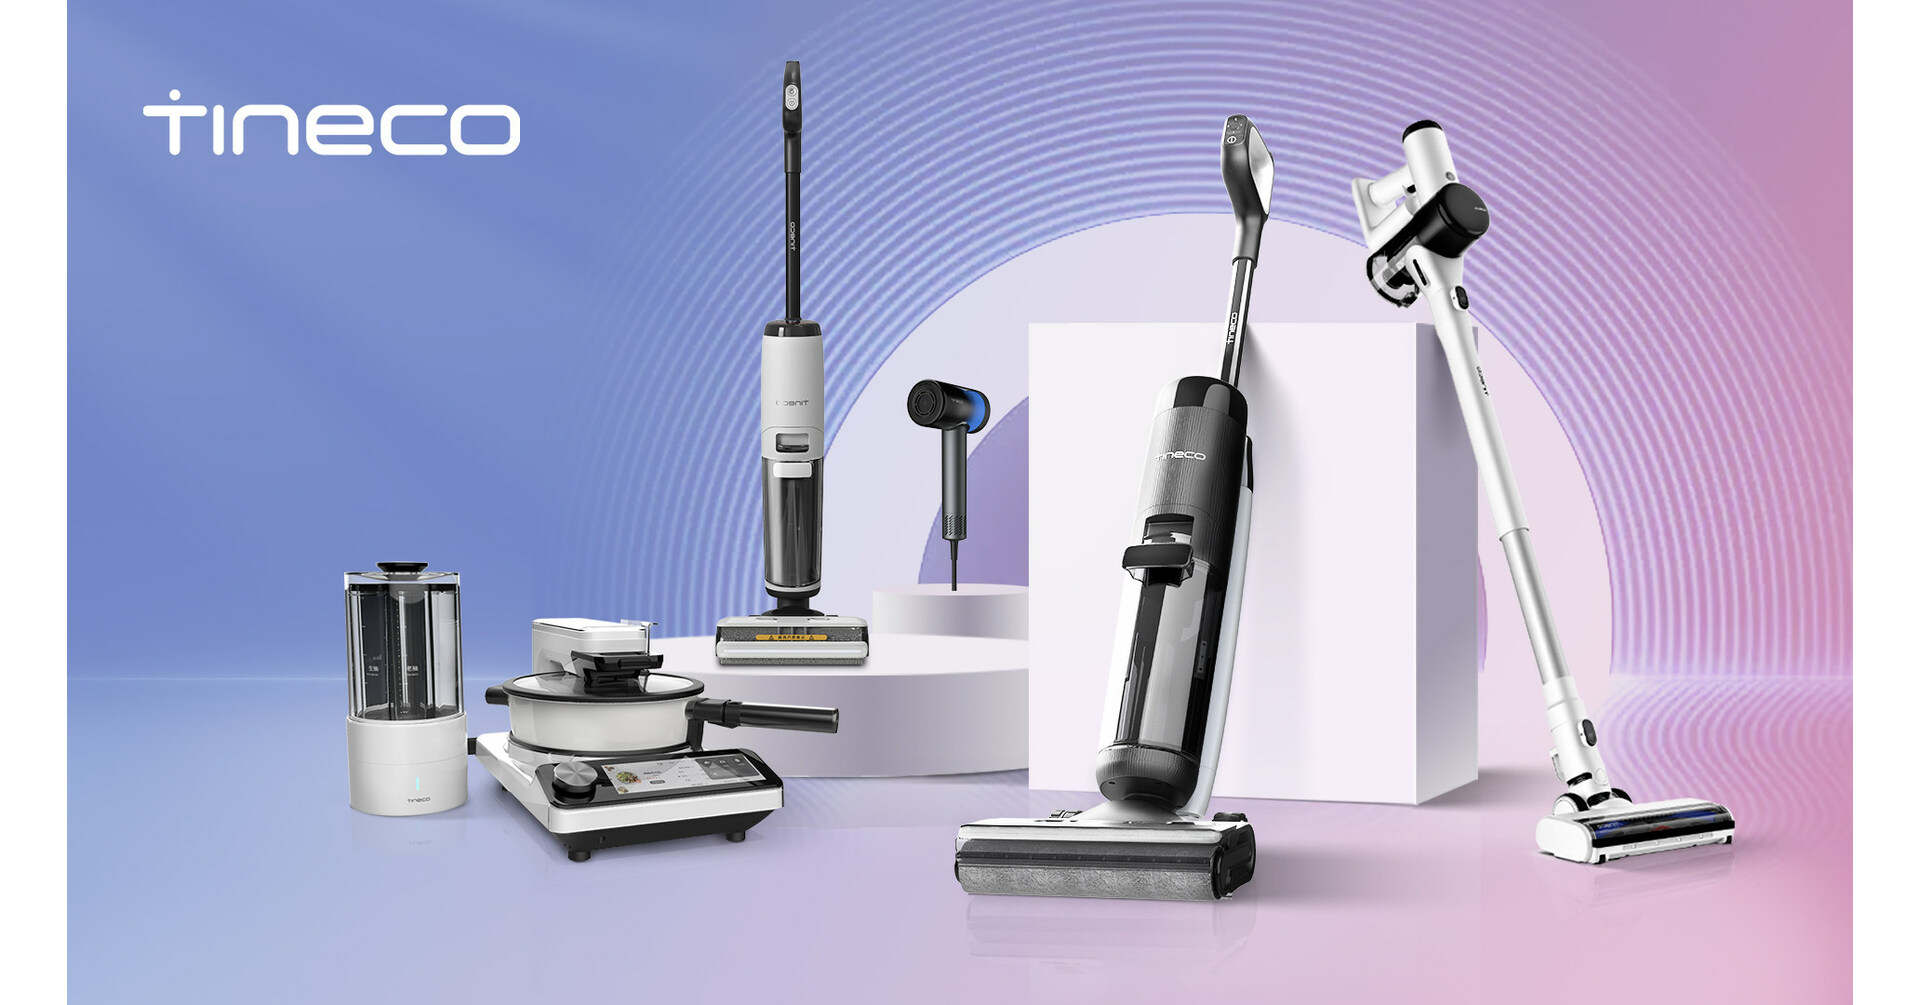 TINECO PRESENTS NEW INNOVATIONS IN FLOOR CARE, KITCHEN, AND